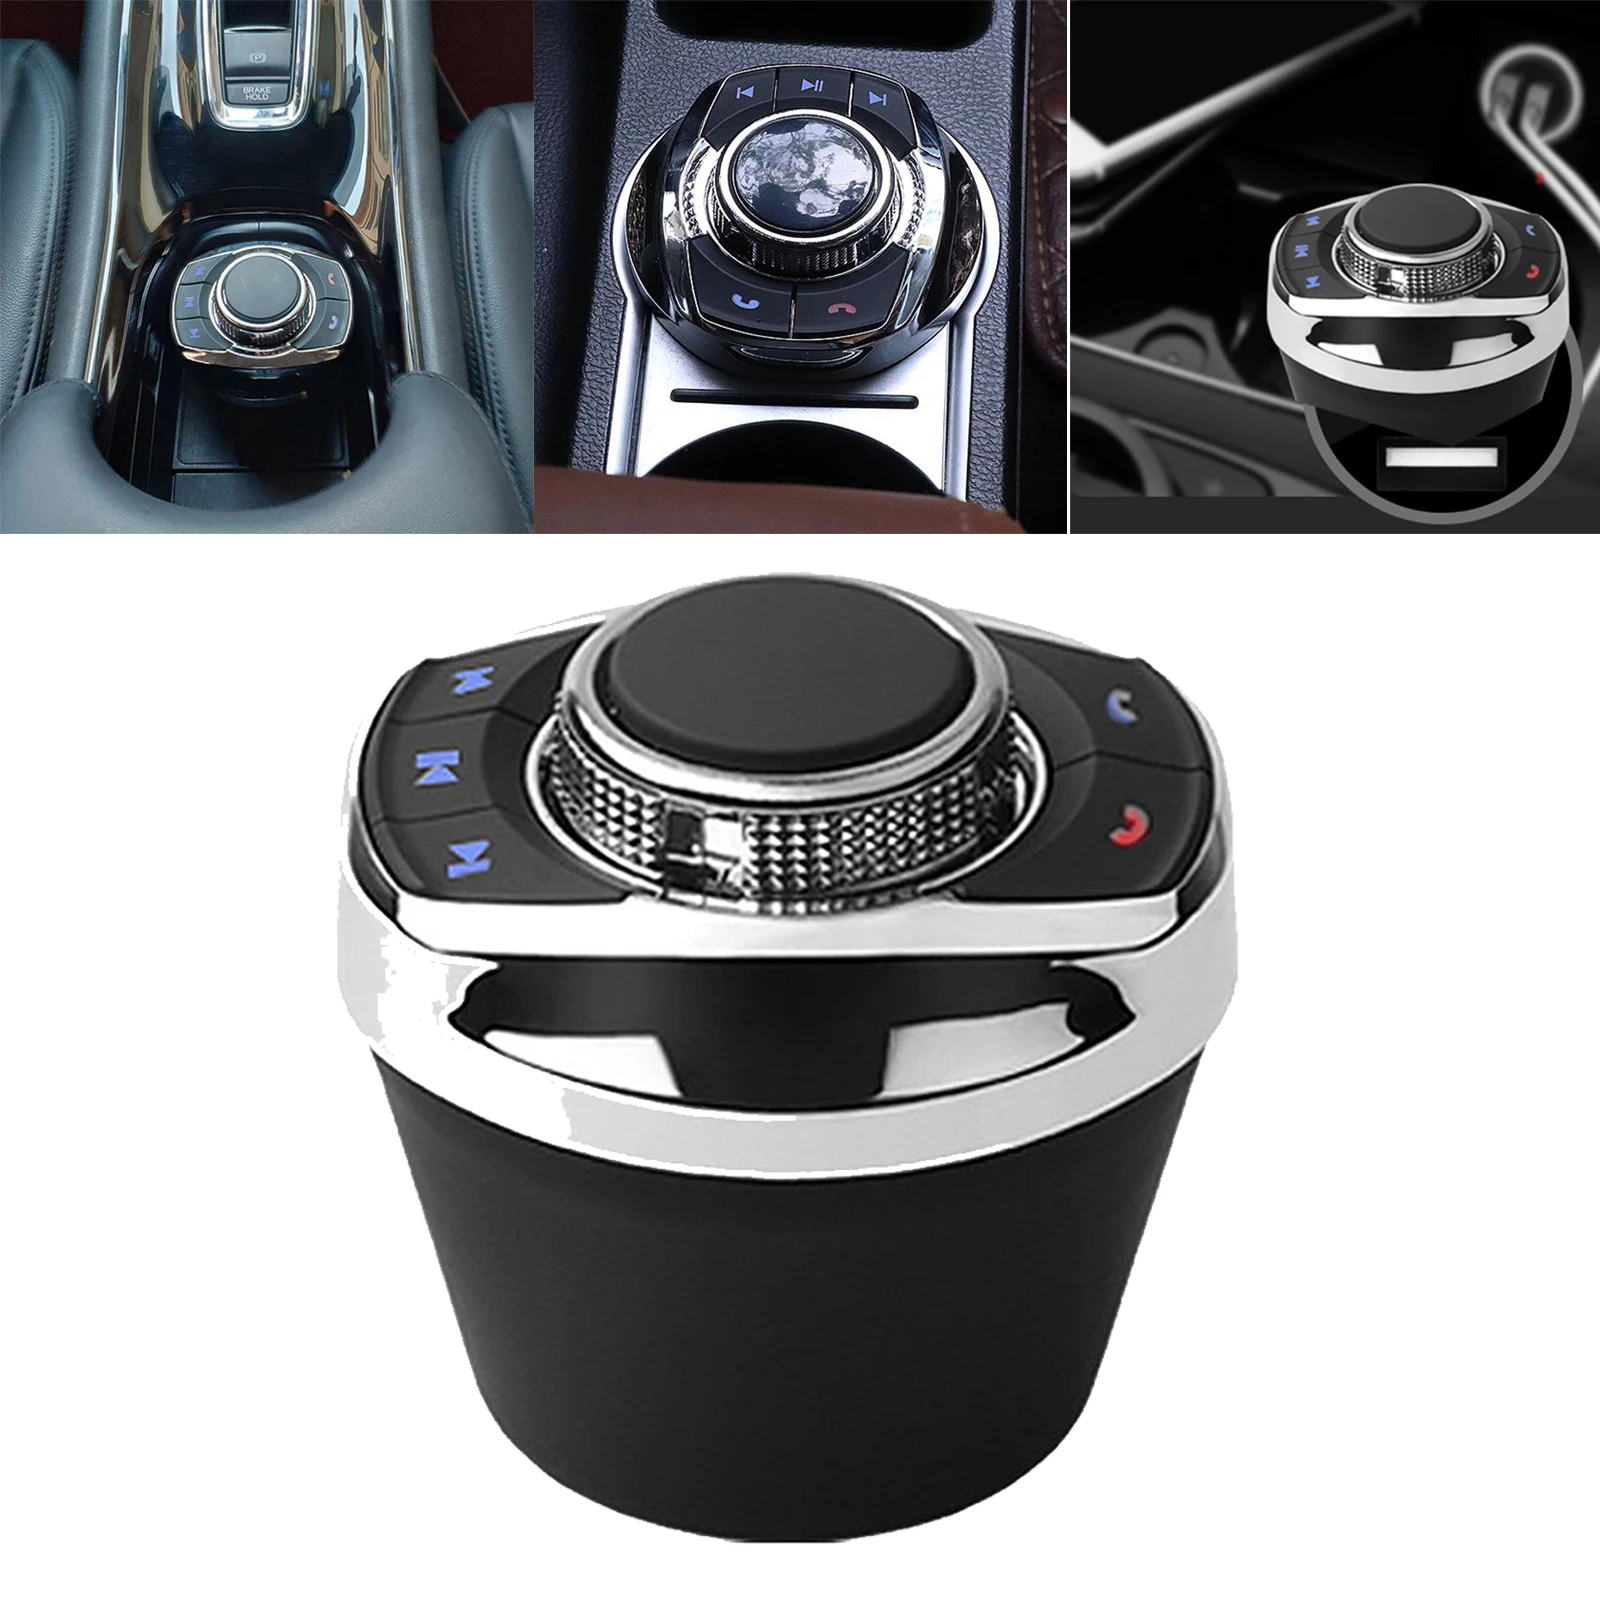 Car Wireless Steering Wheel Control Button Universal Cup Shape With LED Light 8 Keys Functions For Car Android Navigation Player